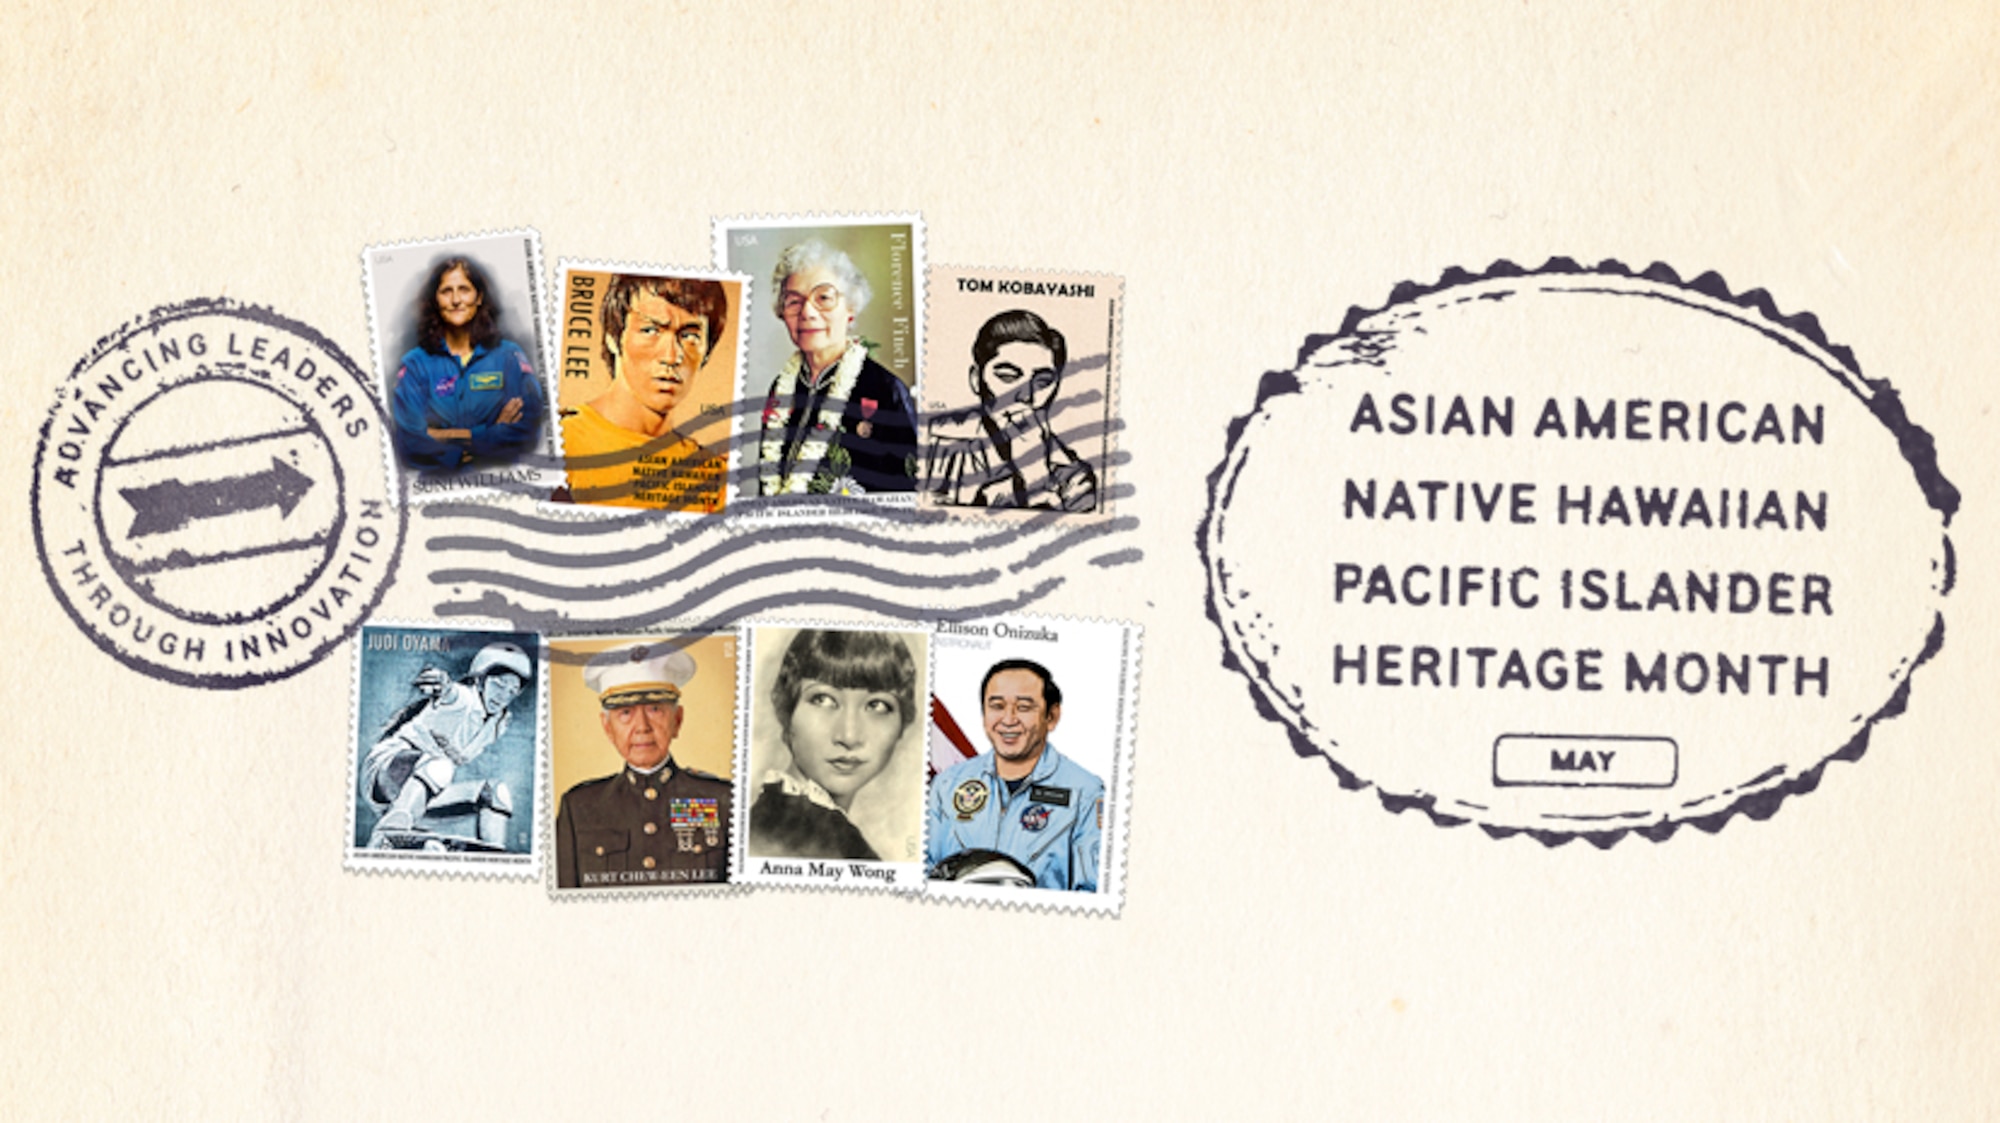 Graphic featuring famous Asian Americans to include Bruce Lee, Suni Williams, and Anna May Wong.